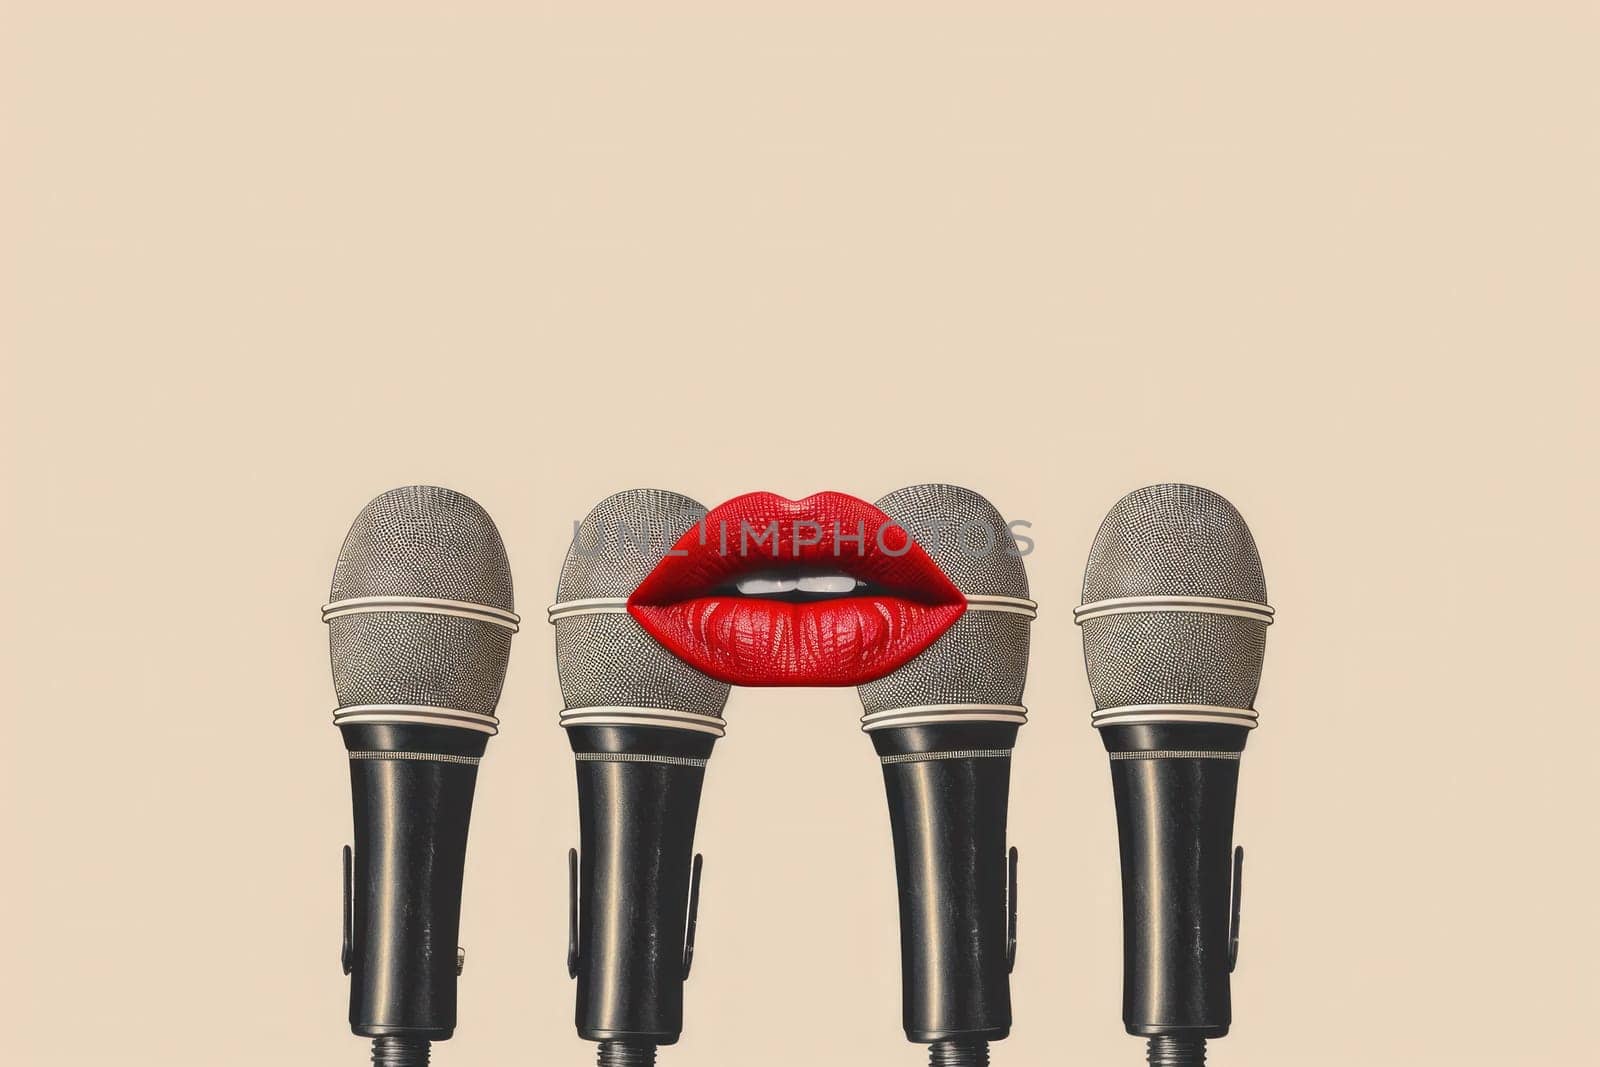 Four microphones with red lips and a microphone on beige background glamorous microphone set for music and entertainment event